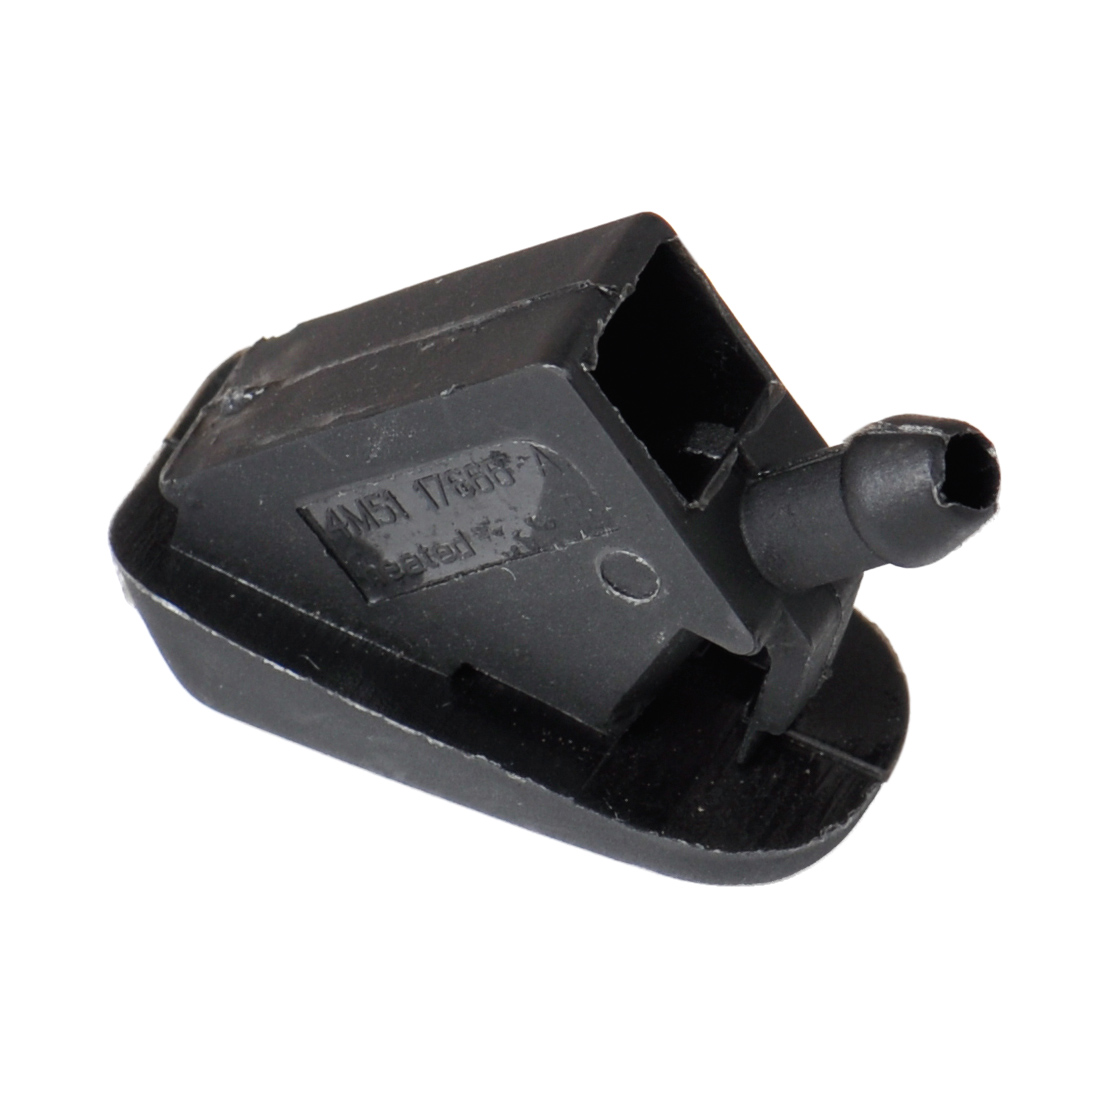 windscreen washer spray nozzle Fit for Ford Focus MK2 MK3